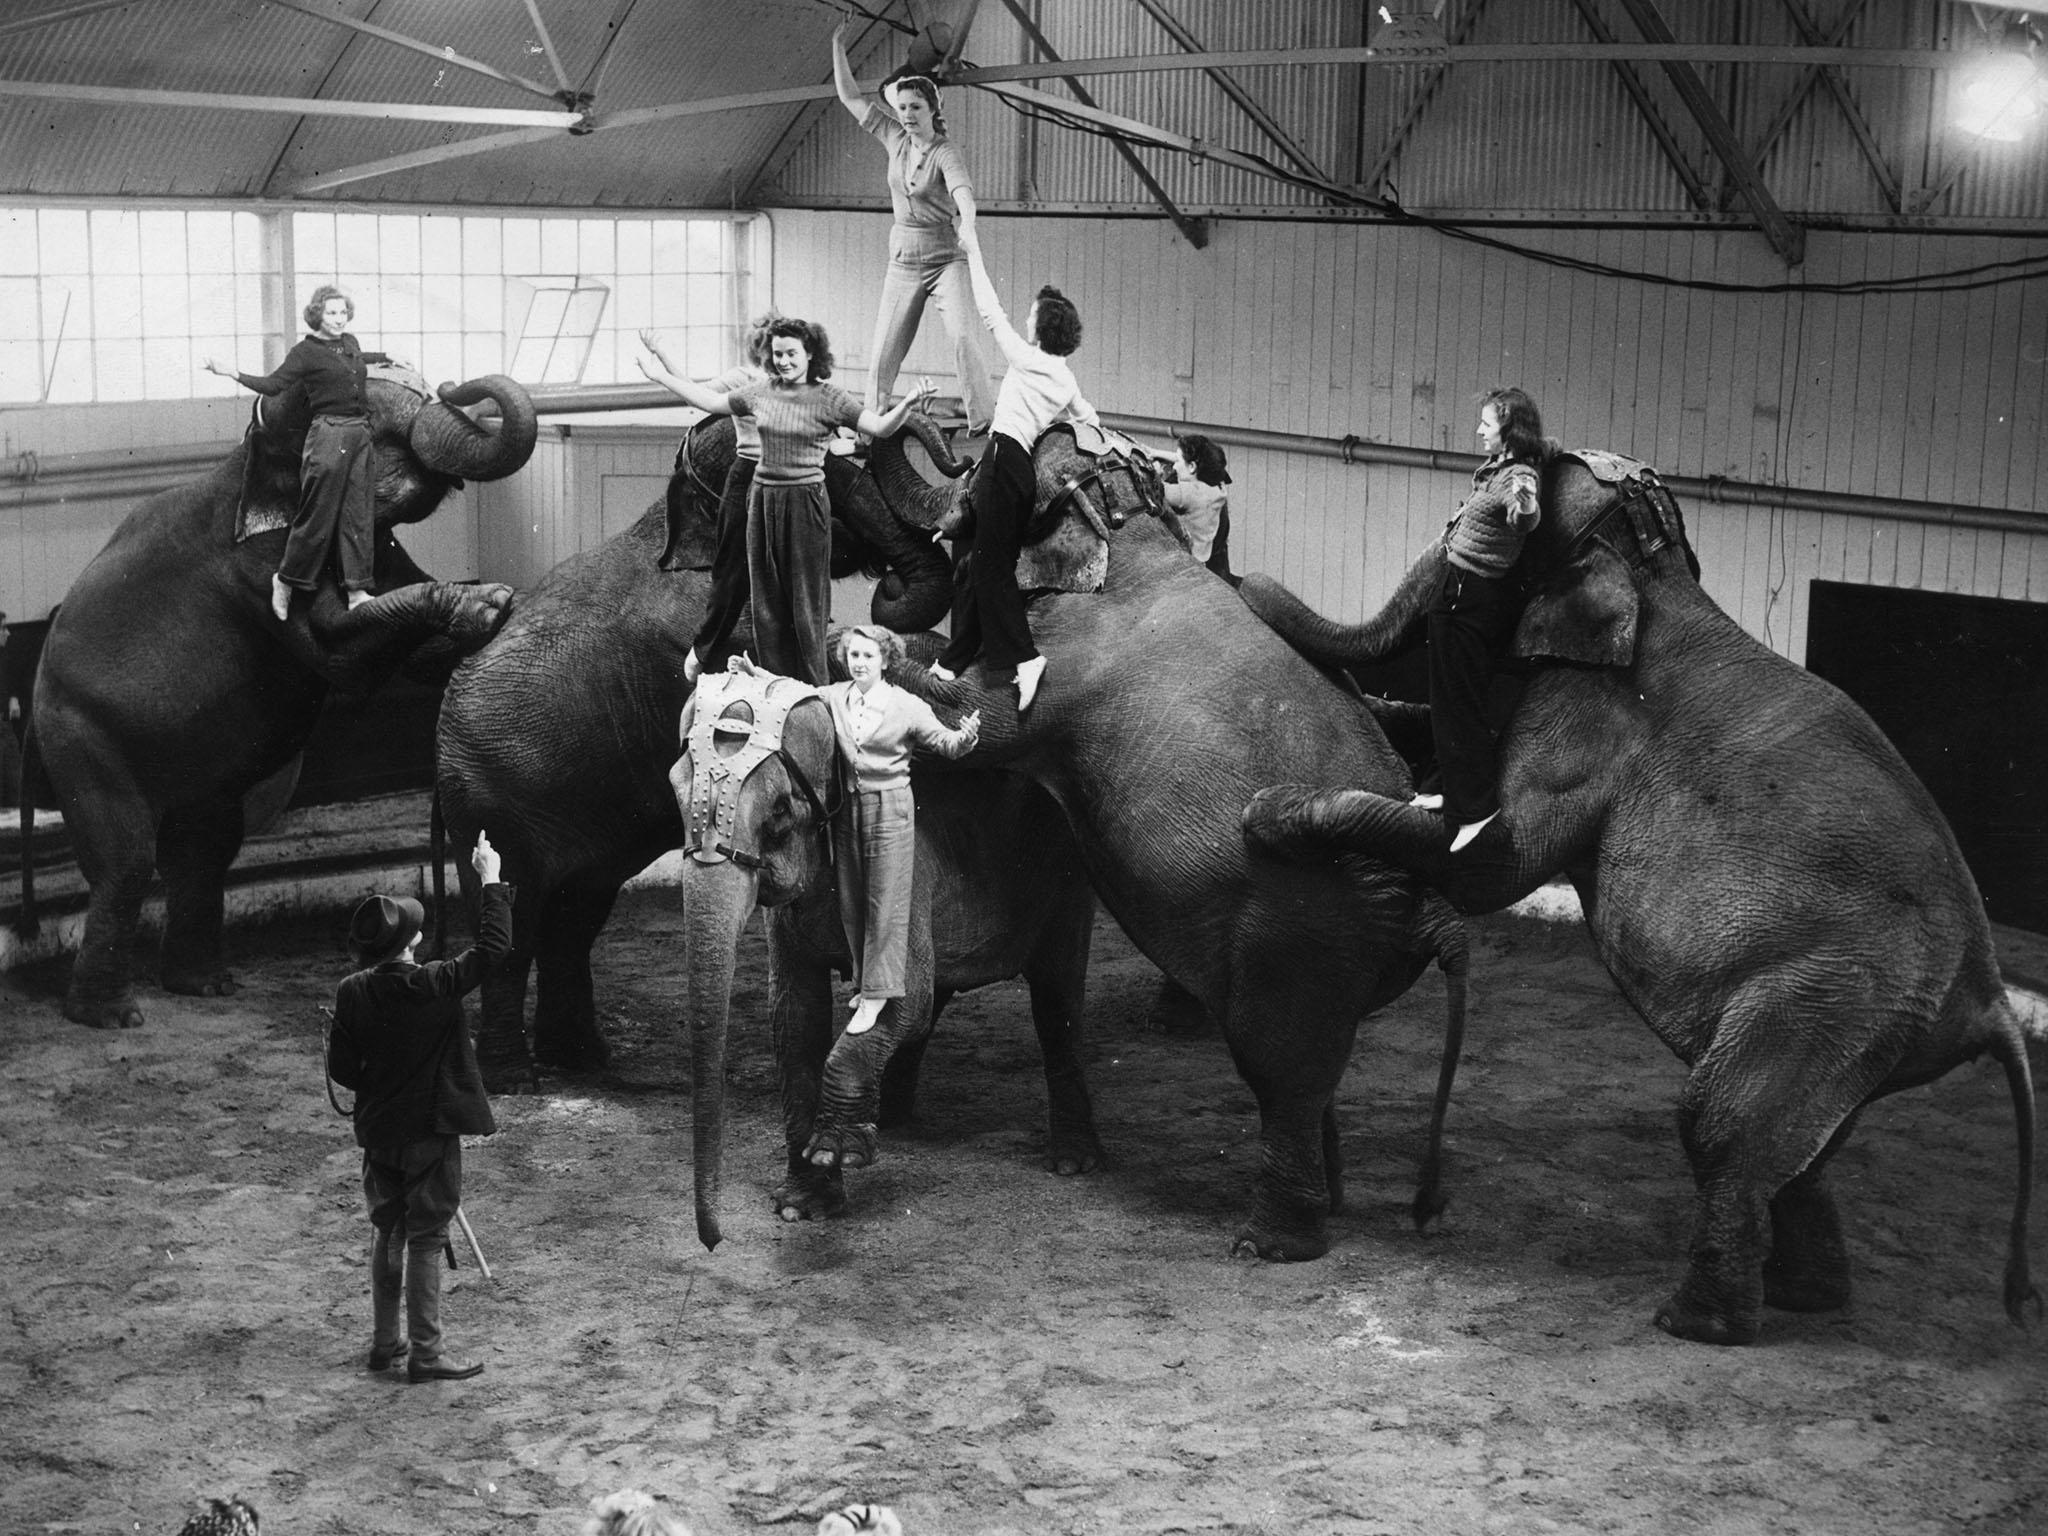 Wild animals moved from the menageries into circus in the mid-19th century